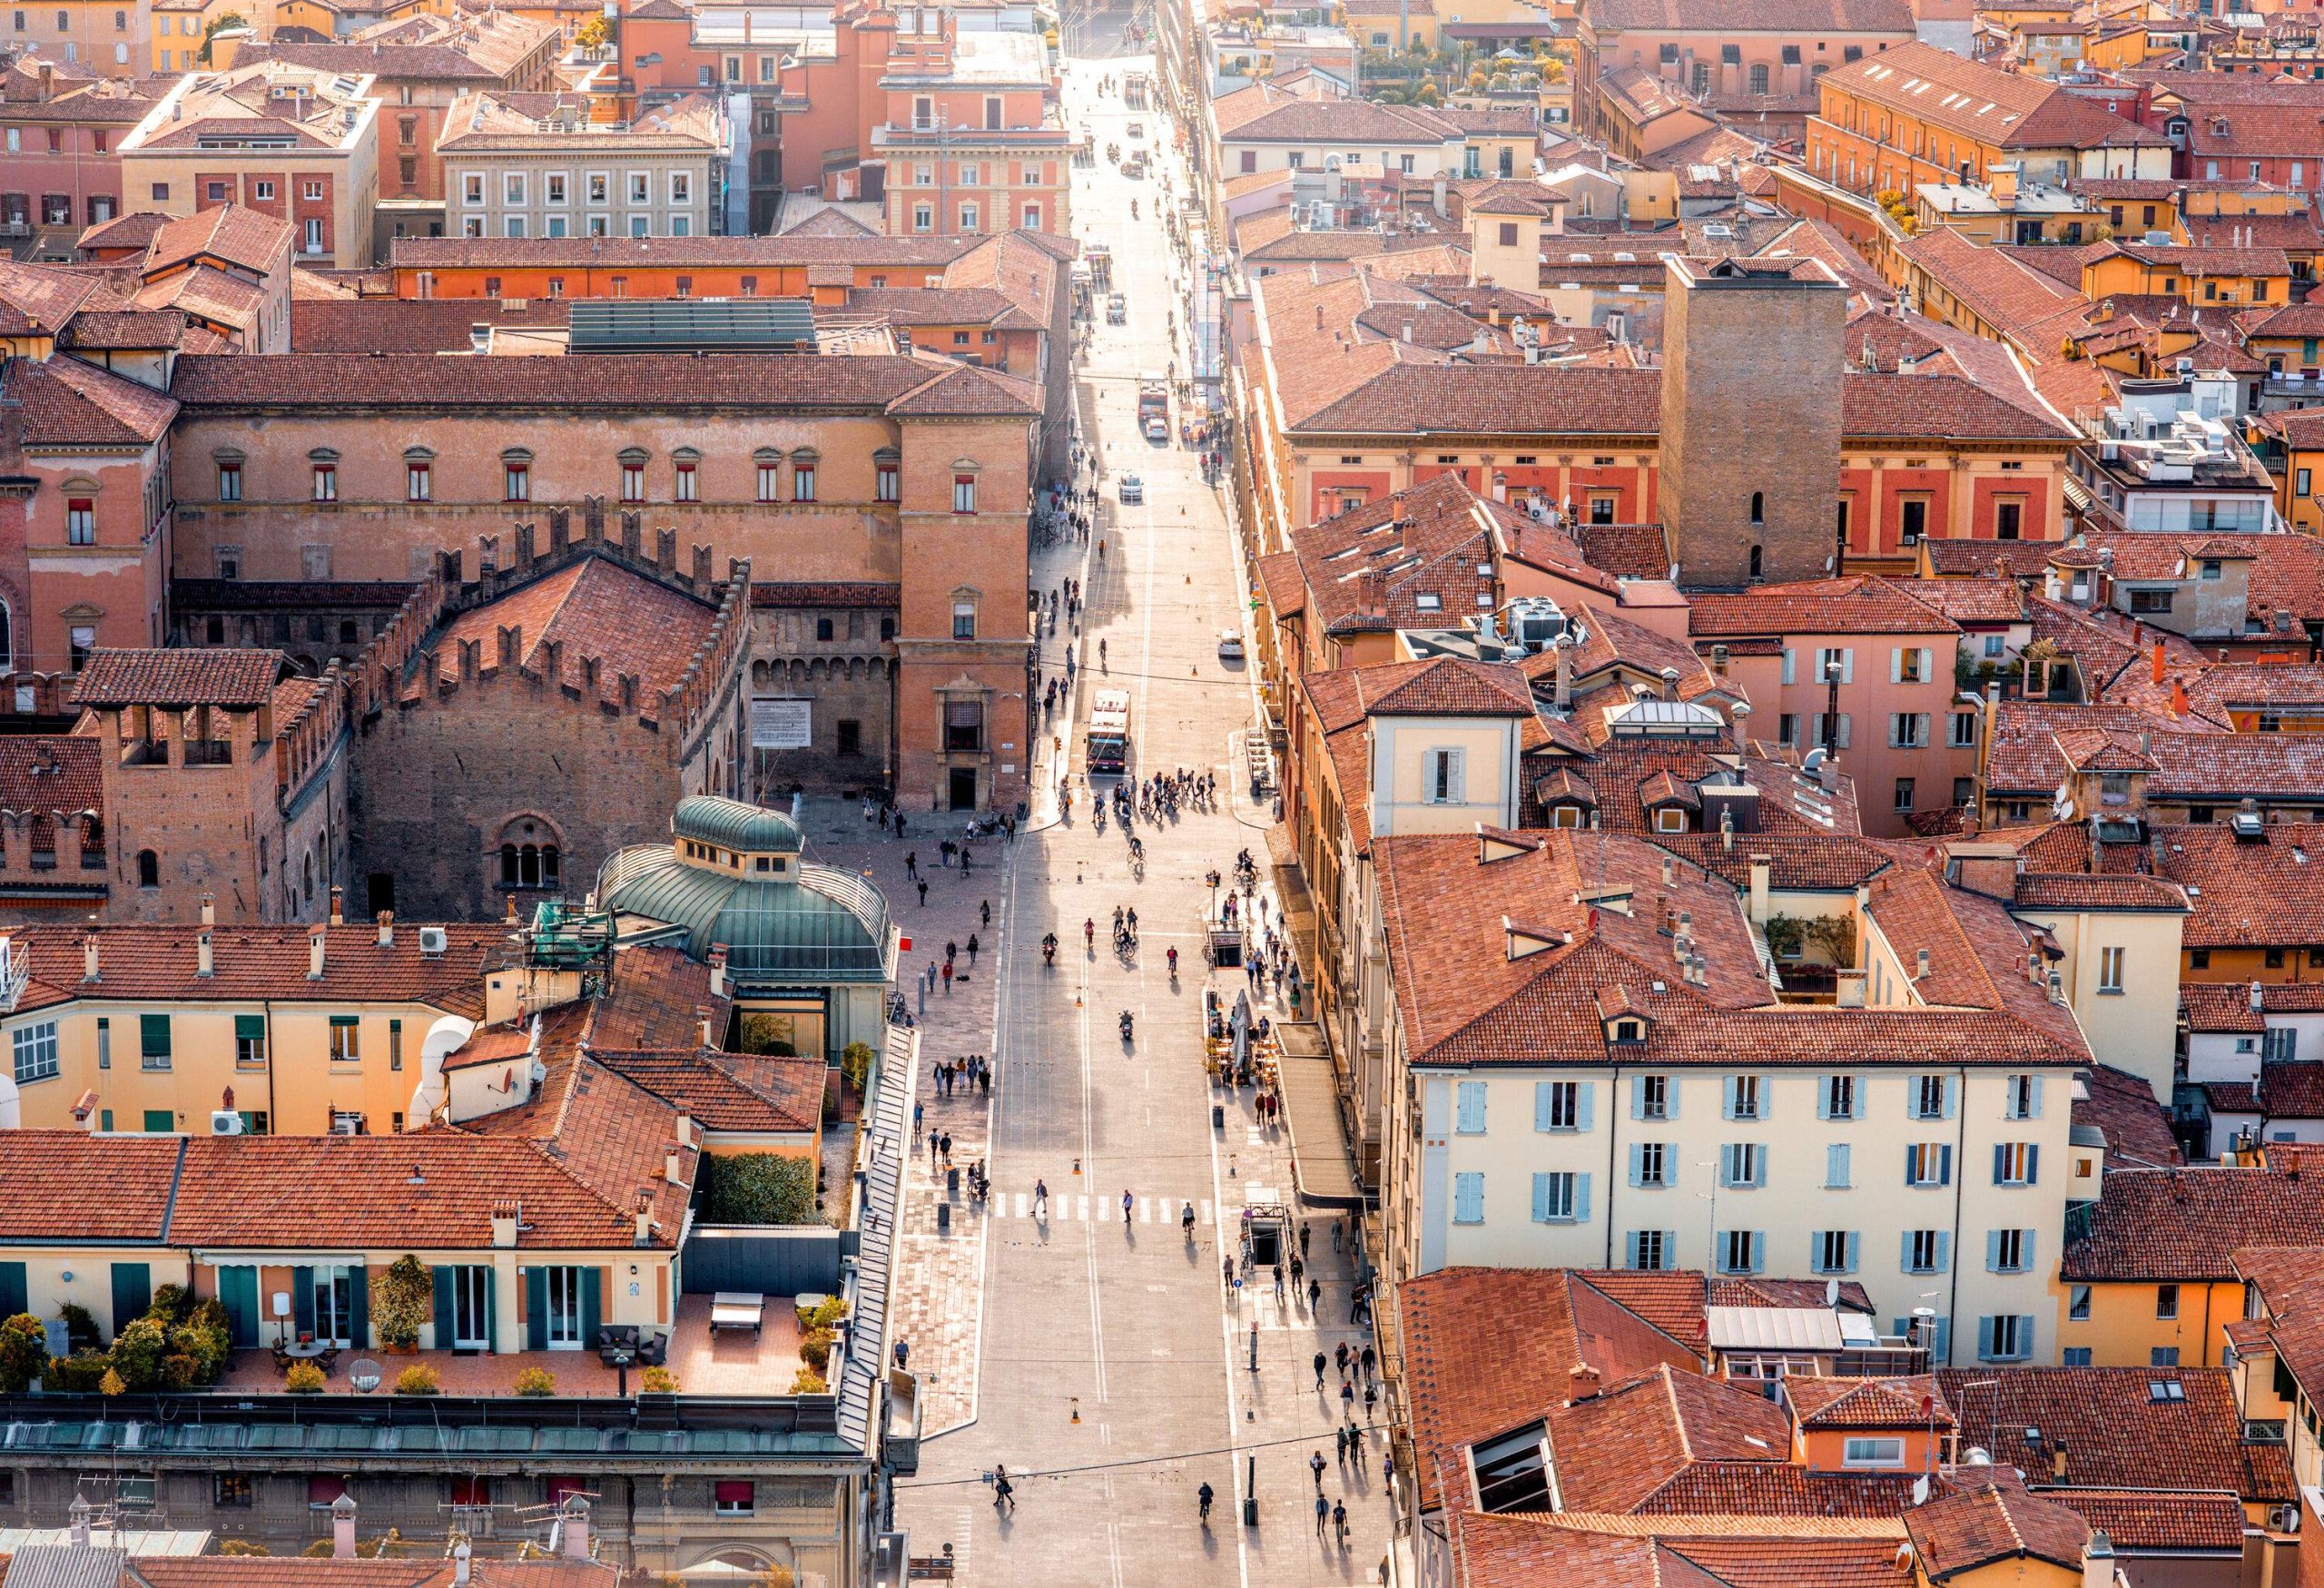 A crowded street across a cluster of buildings with red tile roofs.